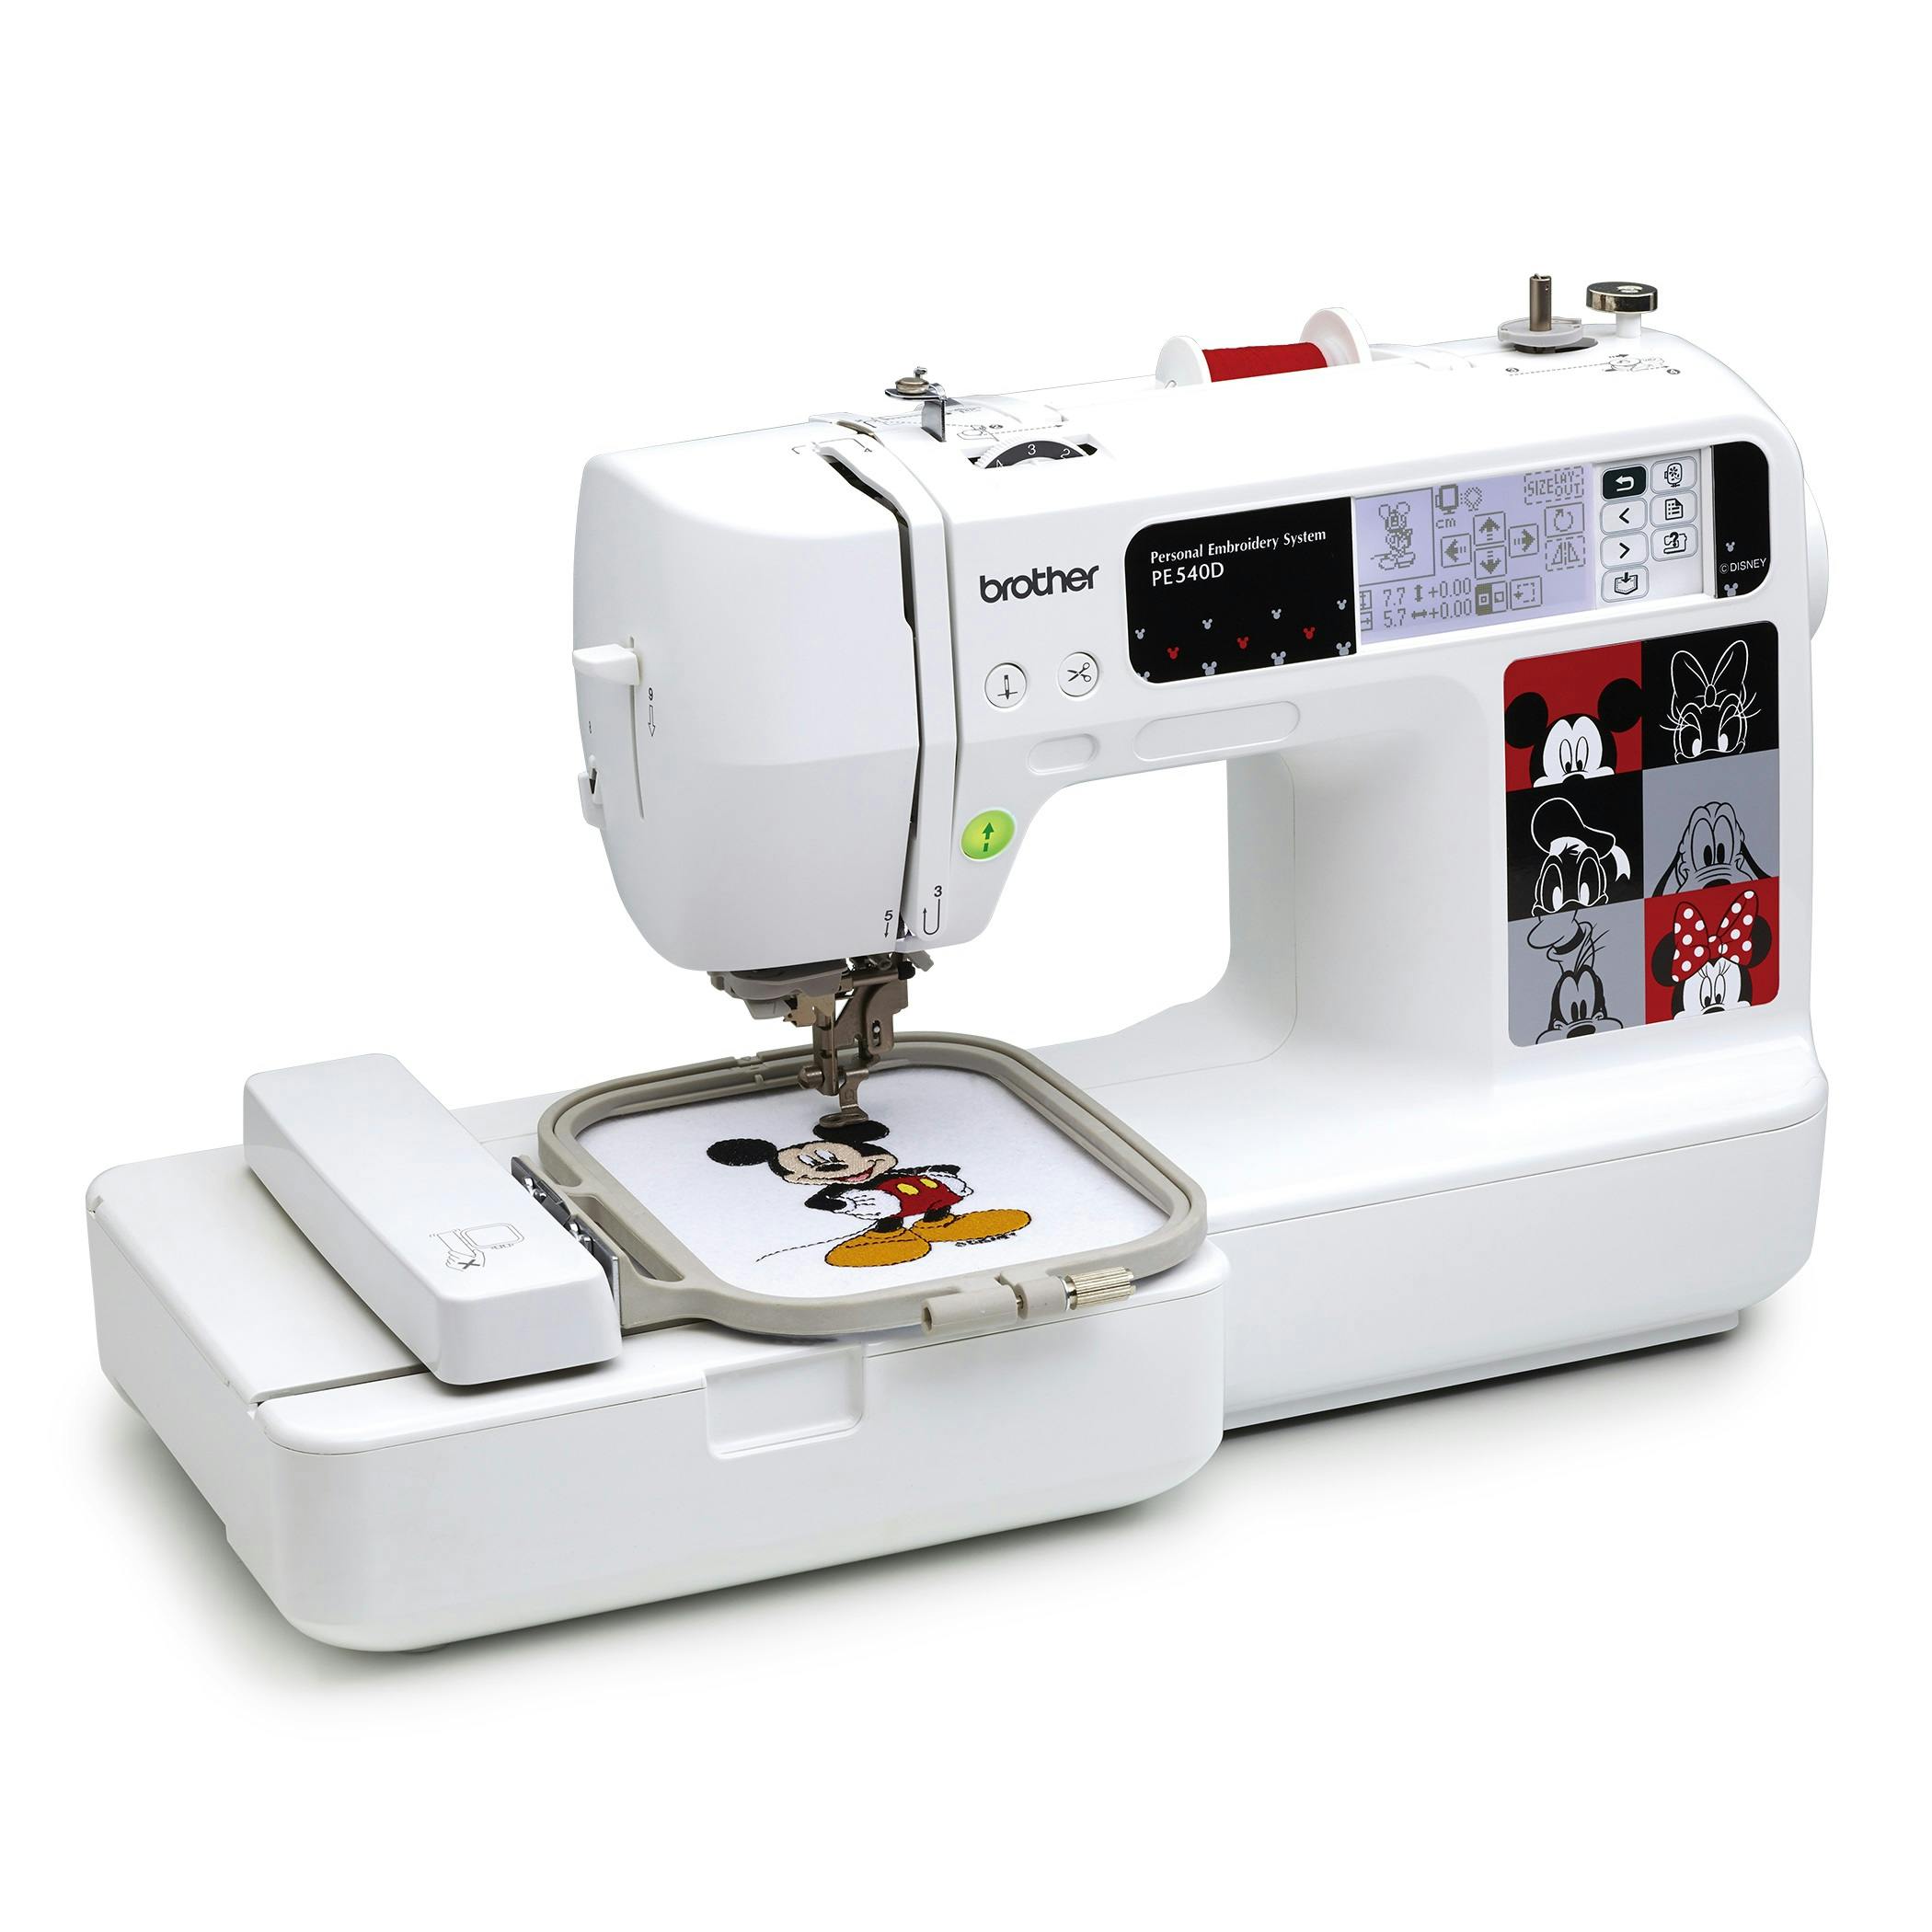 brother ped basic embroidery sewing machine software